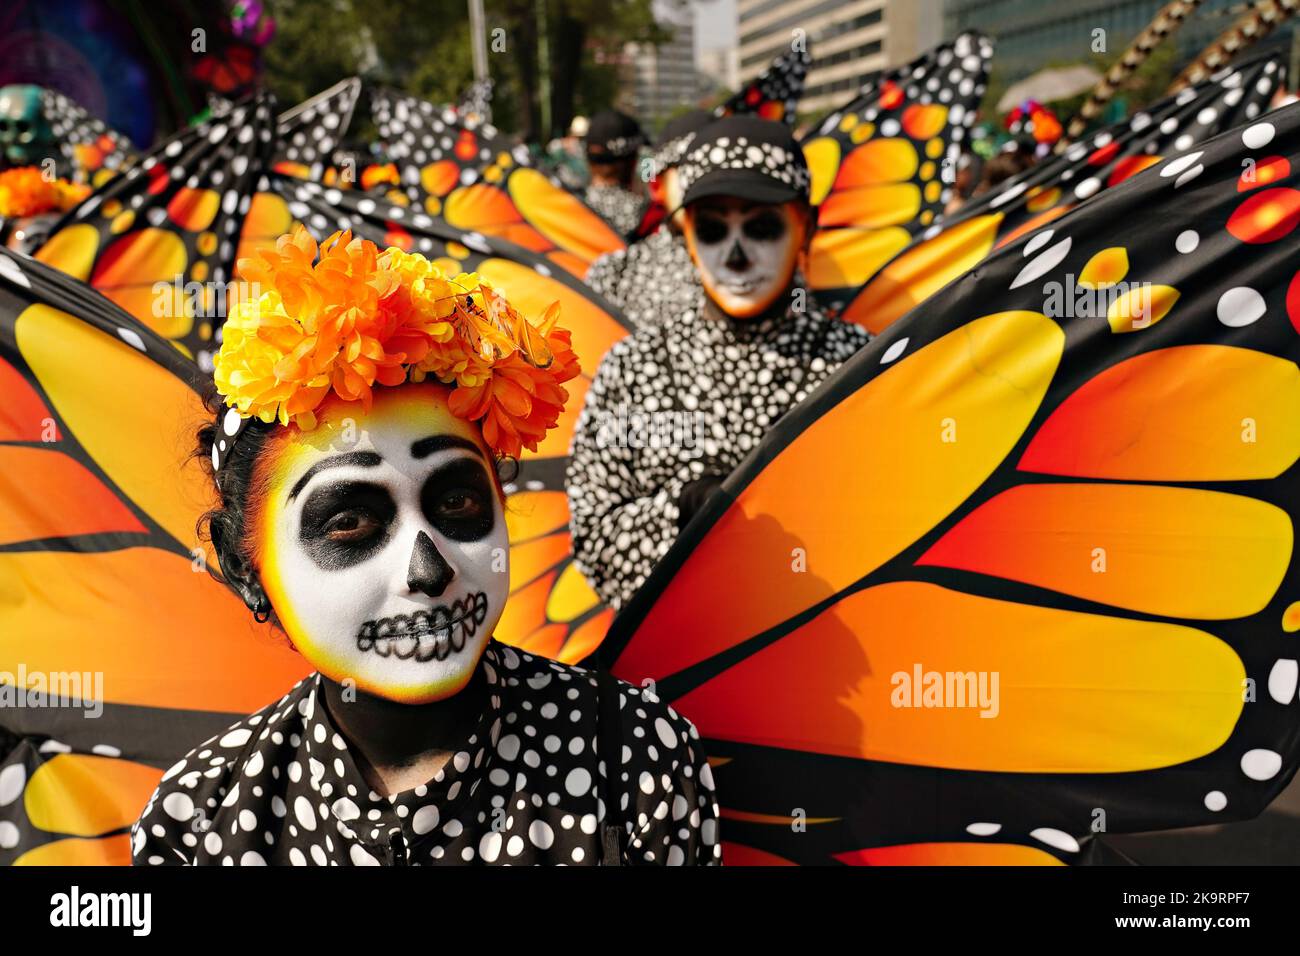 Mexico City, Mexico. 29th Oct, 2022. Monarch butterfly costumed performers during the Grand Parade of the Dead to celebrate Dia de los Muertos holiday on Paseo de la Reforma, October 29, 2022 in Mexico City, Mexico. Credit: Richard Ellis/Richard Ellis/Alamy Live News Stock Photo